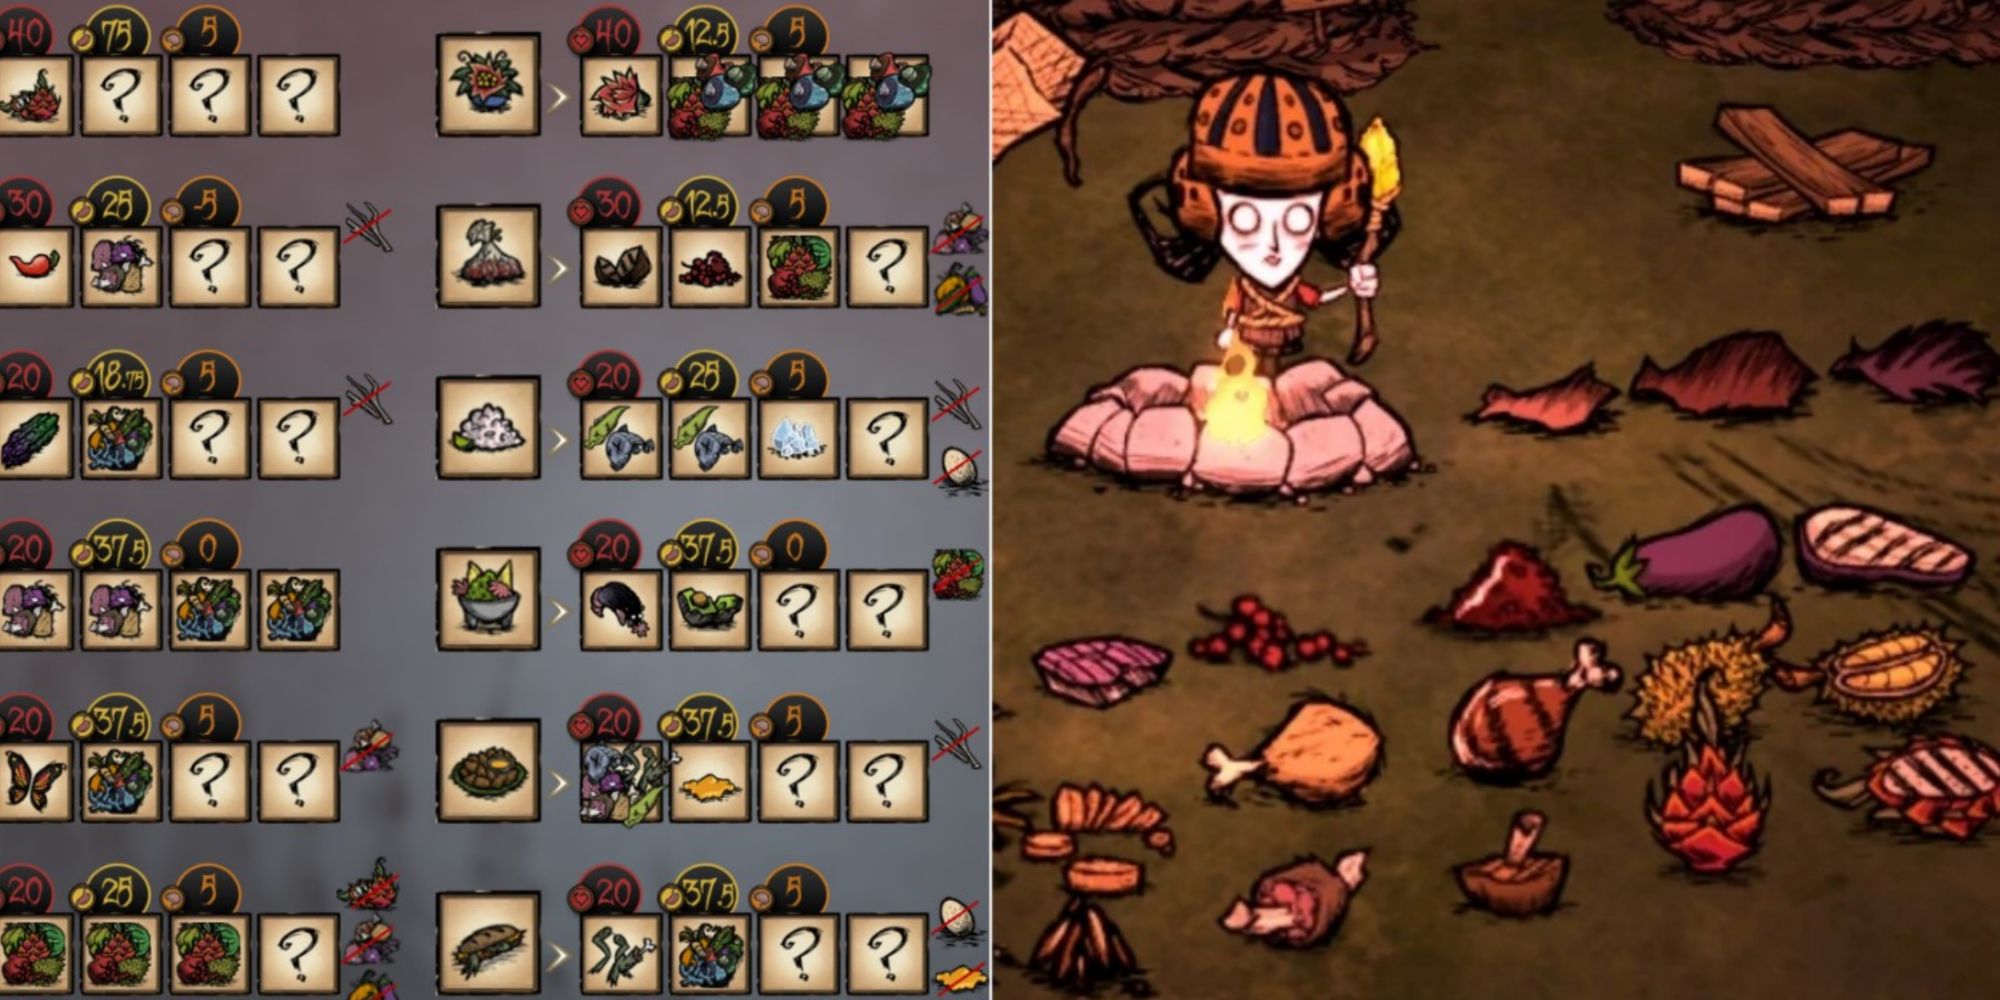 Willow Making Recipes Using The Crockpot In Don't Starve Together